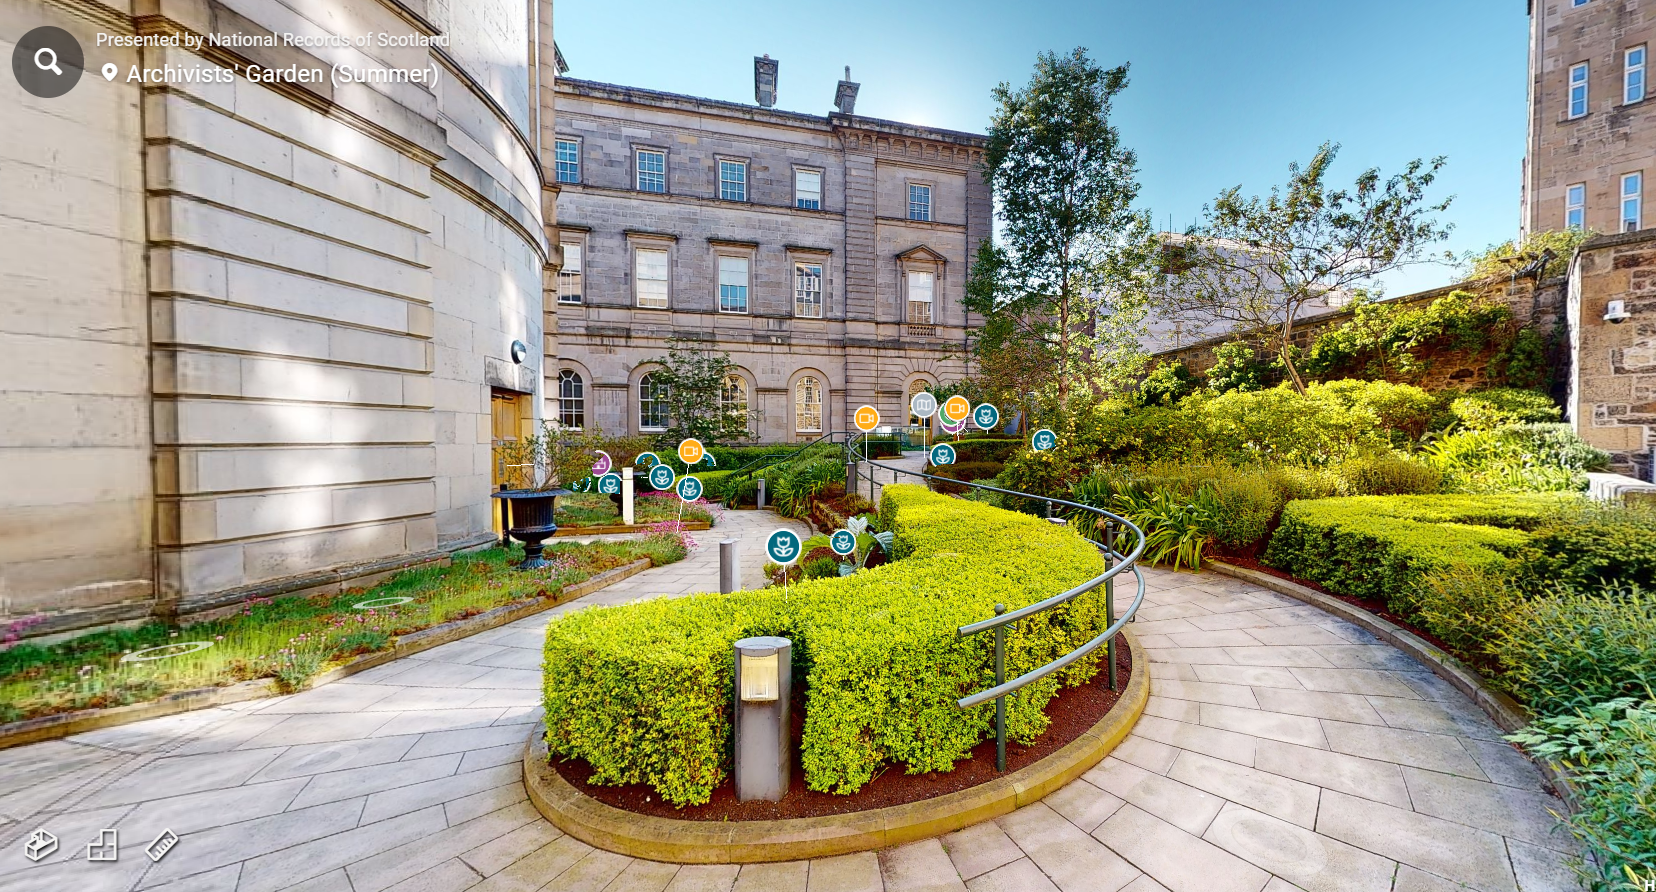 Photograph of the Archivists' Garden showing the surrounding buildings and plant life